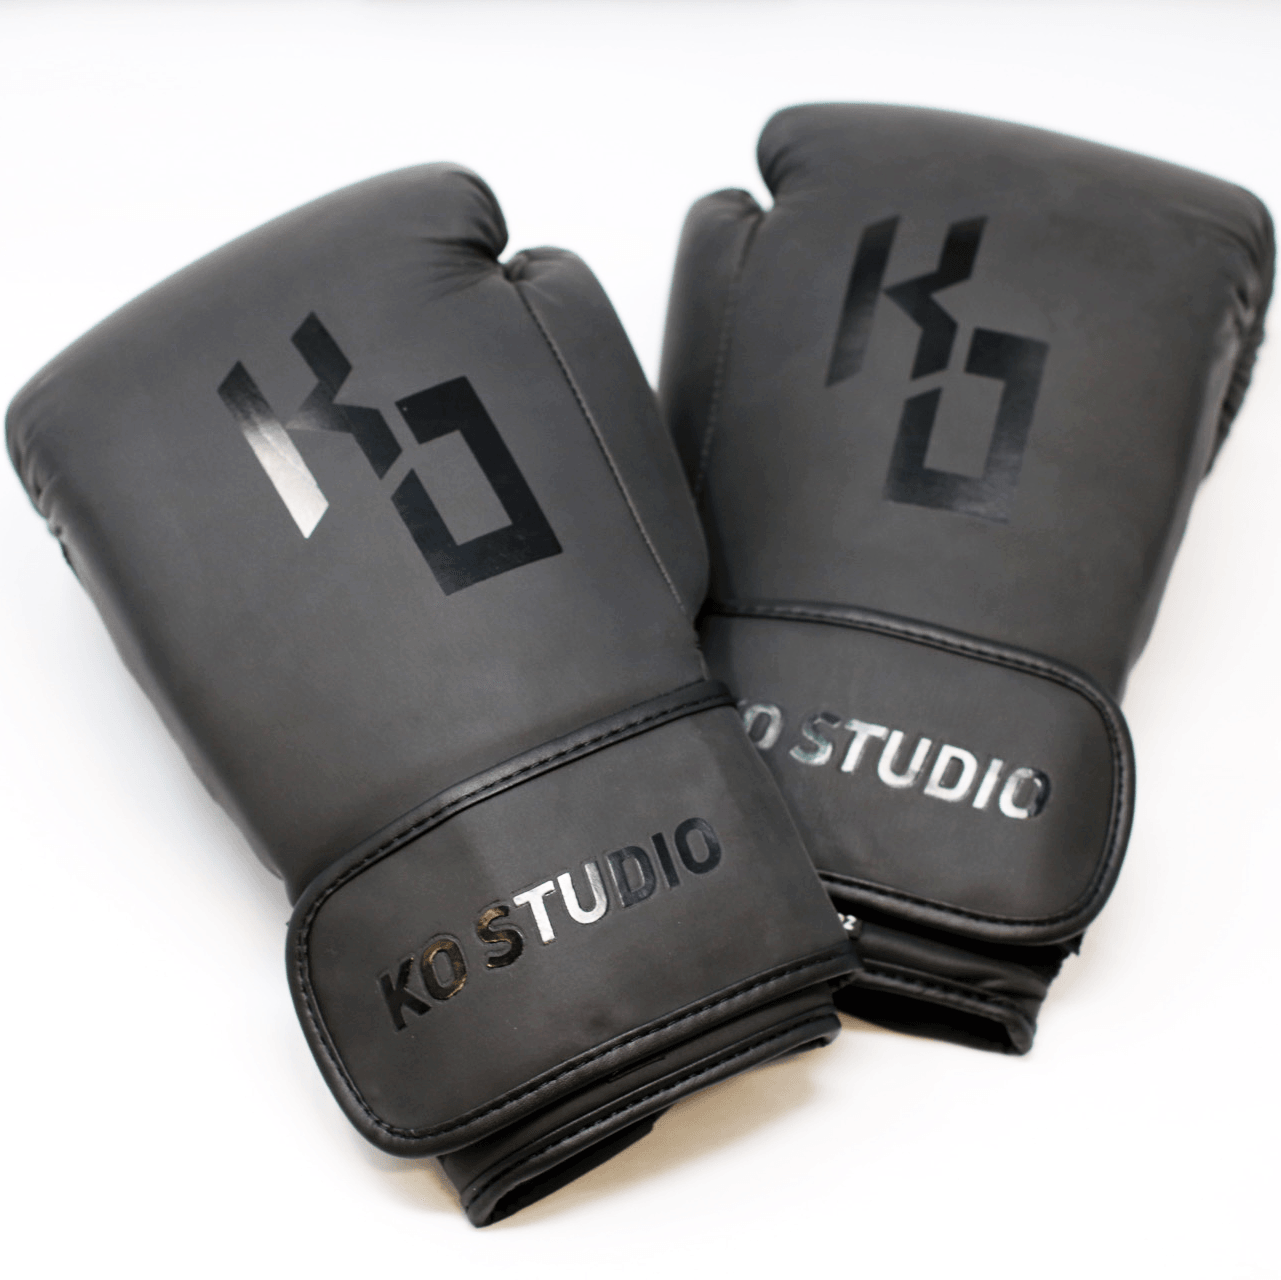 Here's how I made these custom Louis Vuitton boxing gloves for